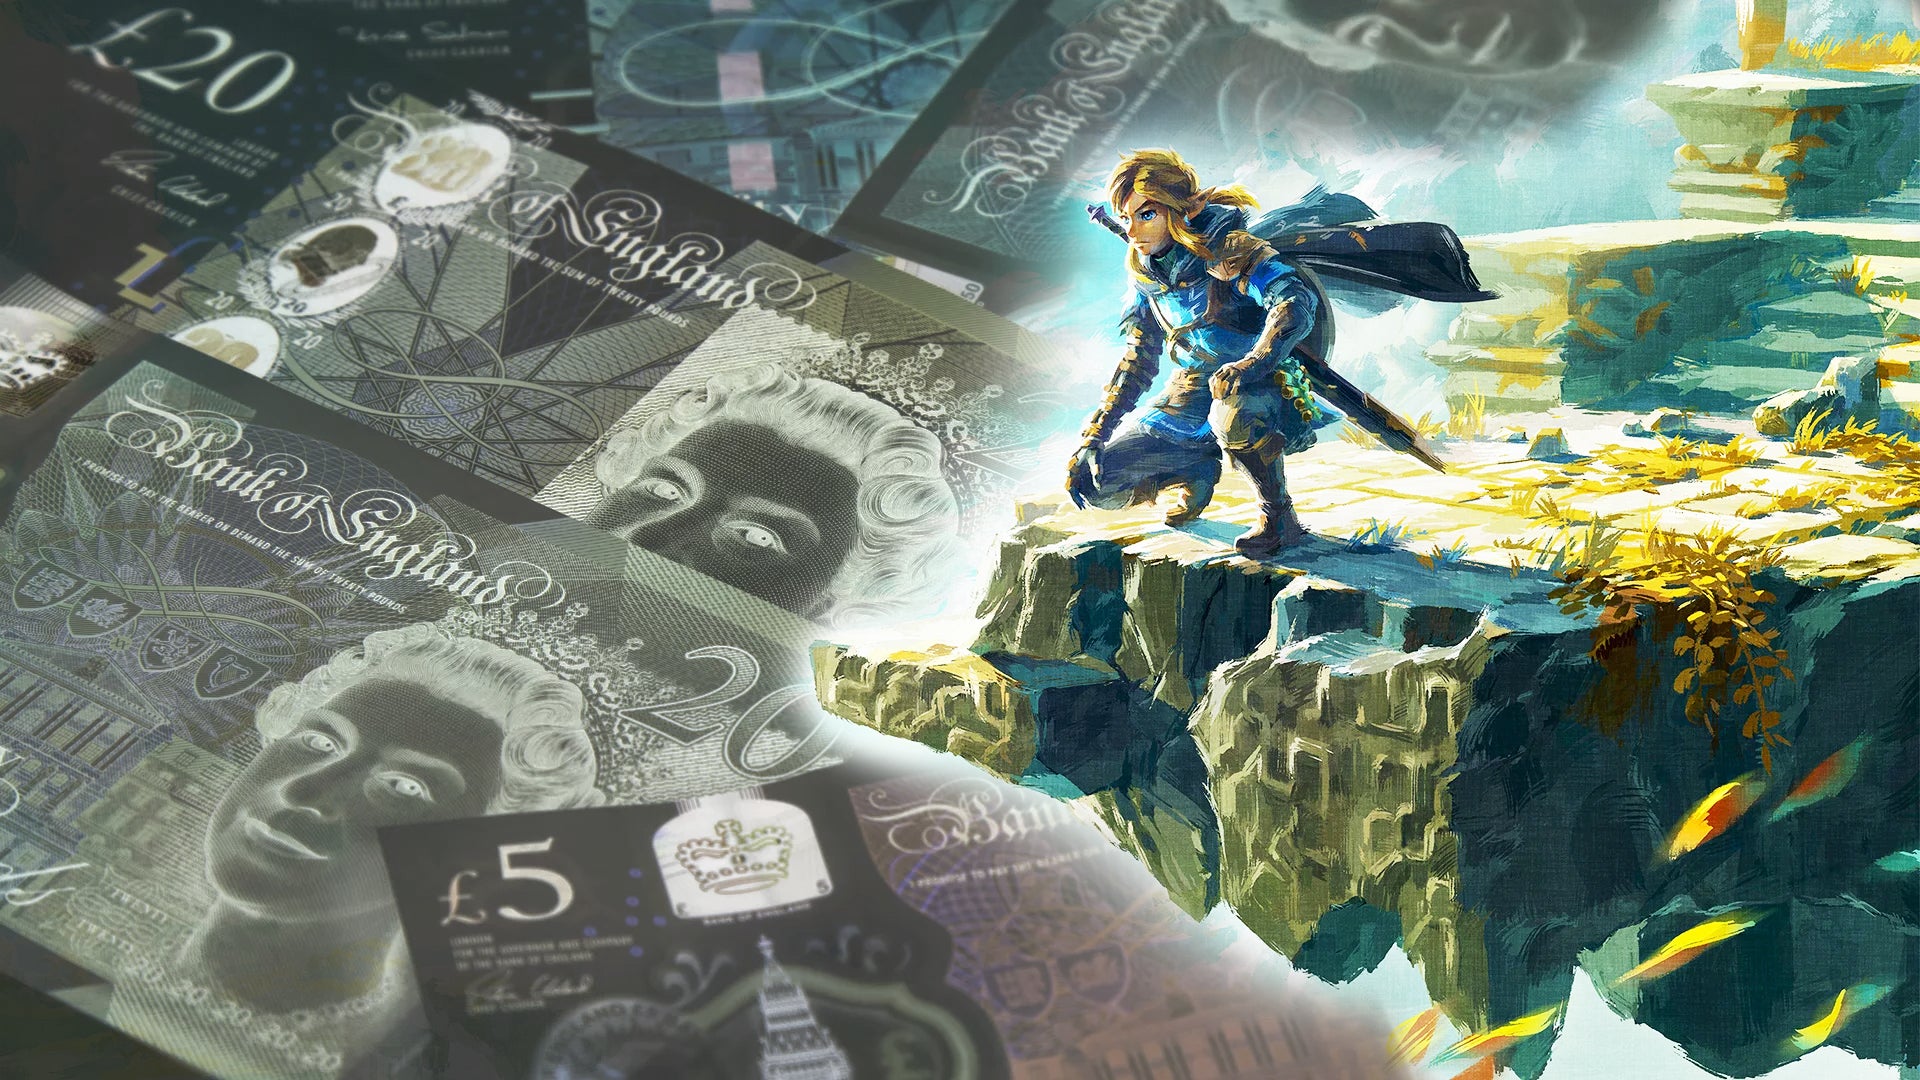 Image for Zelda: Tears of the Kingdom will be worth ?70, but the price highlights gaming’s possibly unsustainable future